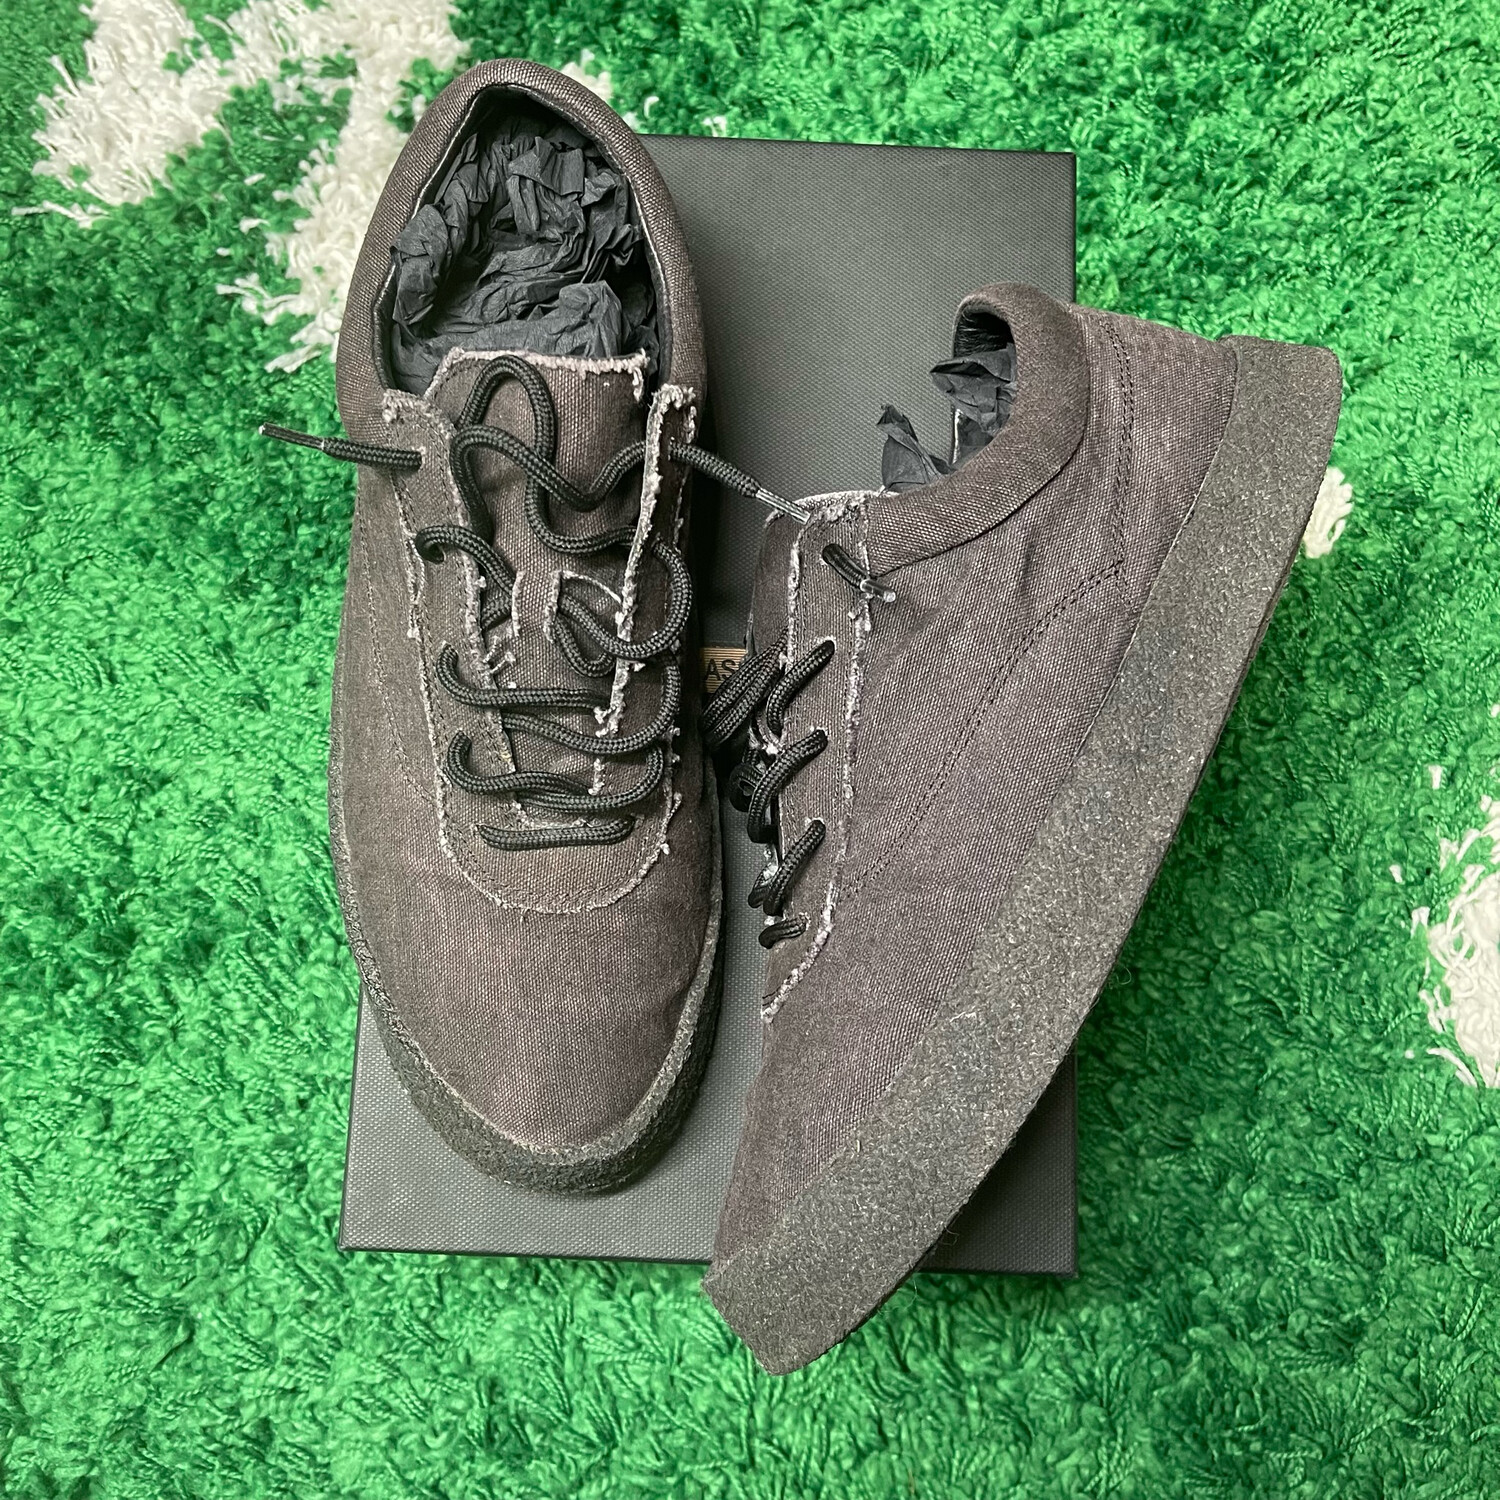 Yeezy Crepe Sneaker Season 6 Thick Shaggy Suede Graphite Size 11